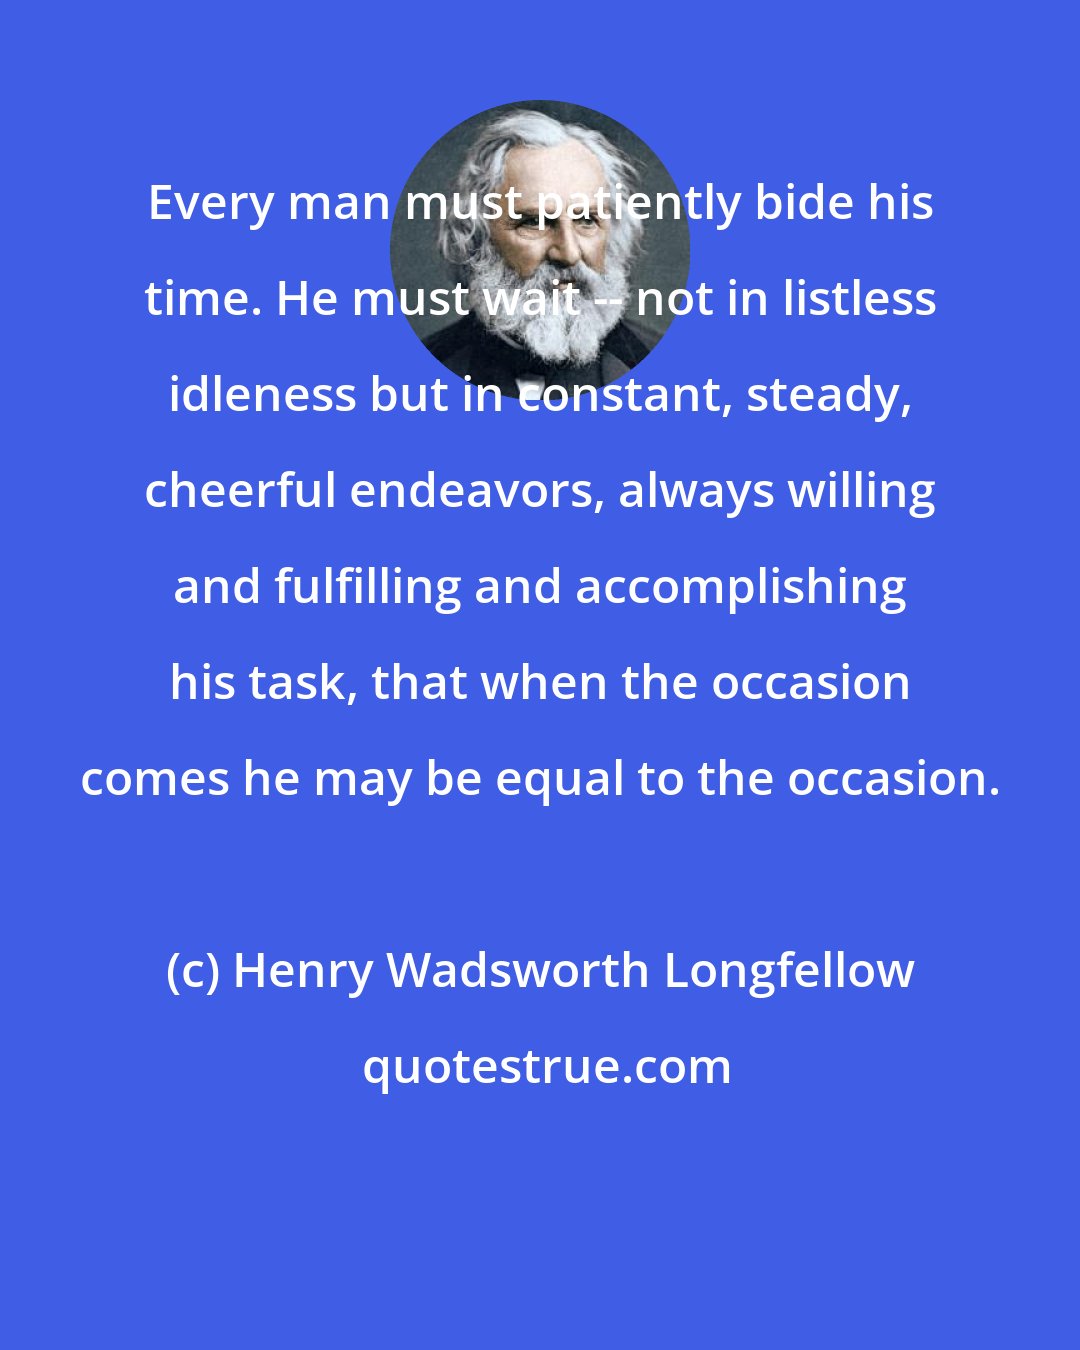 Henry Wadsworth Longfellow: Every man must patiently bide his time. He must wait -- not in listless idleness but in constant, steady, cheerful endeavors, always willing and fulfilling and accomplishing his task, that when the occasion comes he may be equal to the occasion.